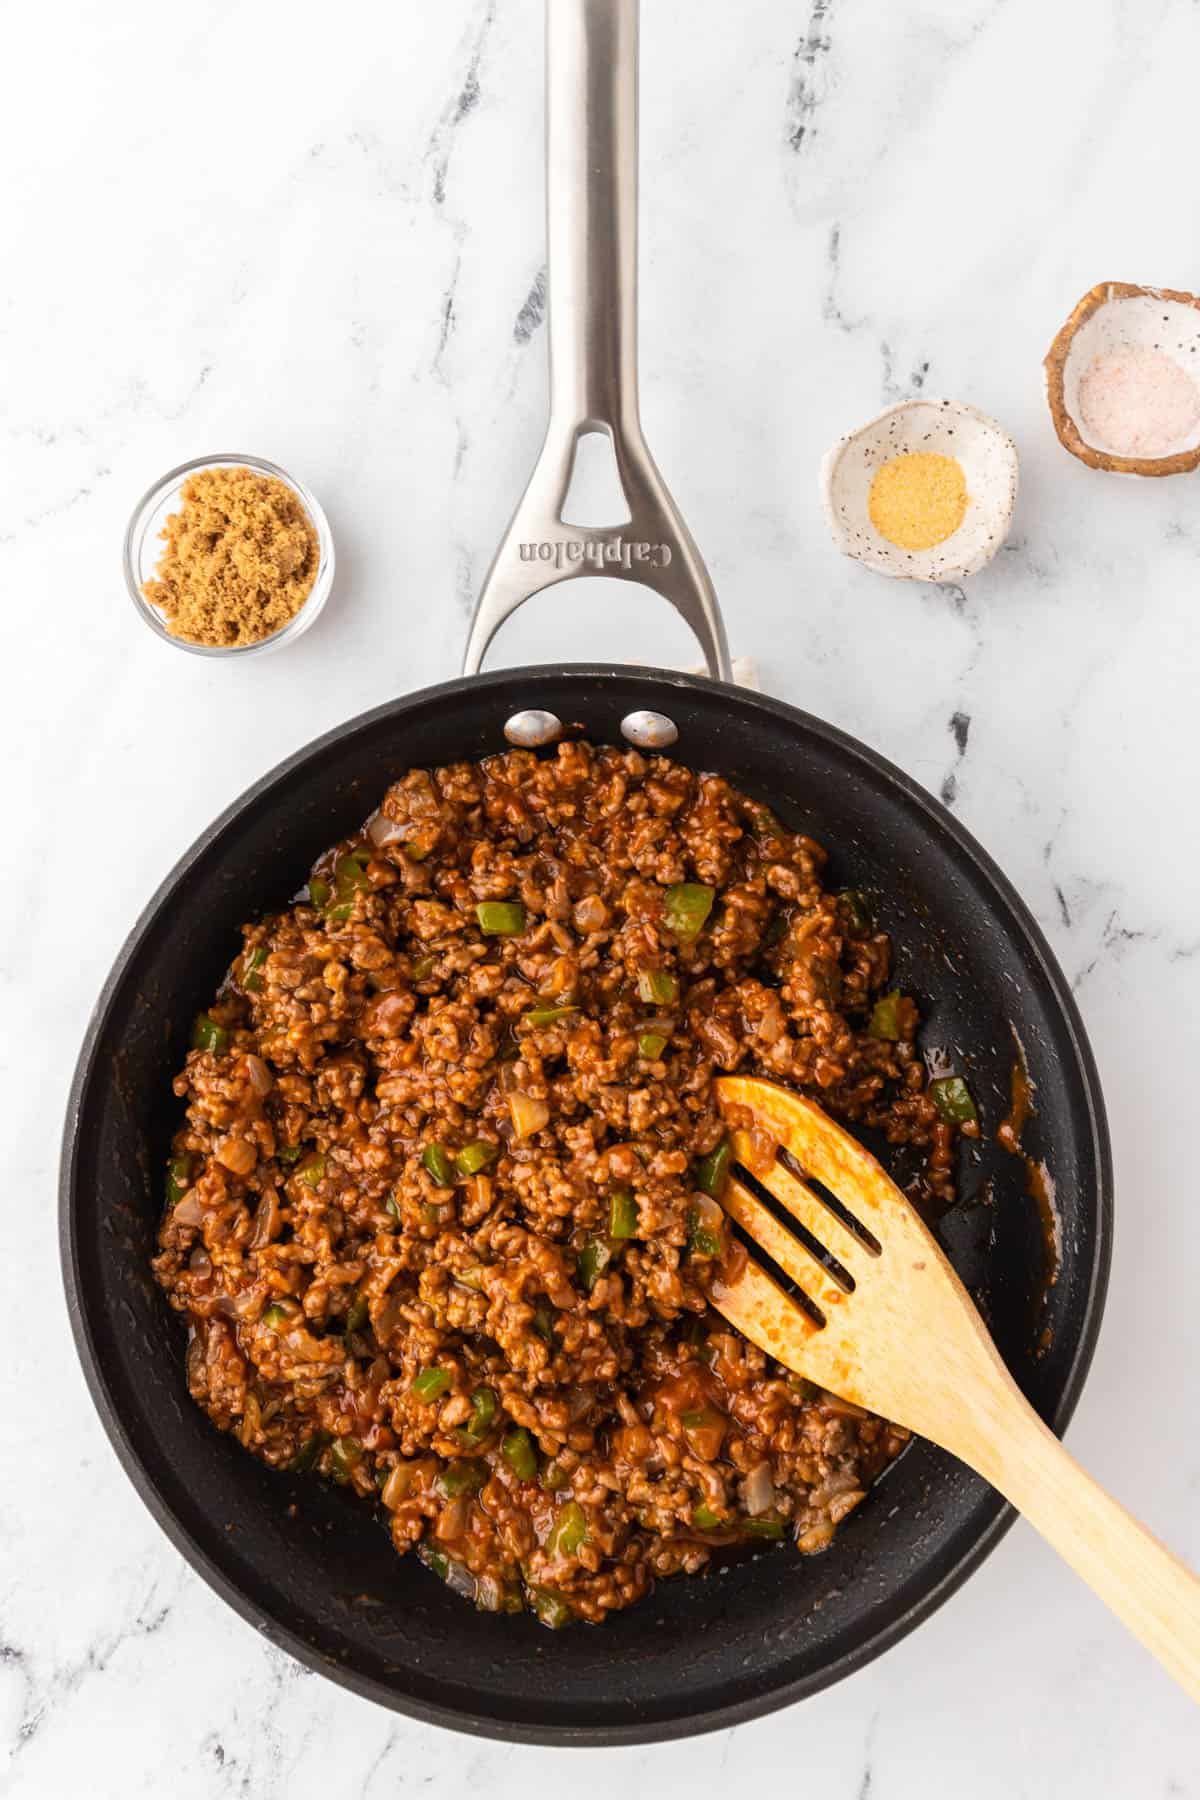 Skillet holding homemade Sloppy Joes ingredients including meat and green pepper mixture with a brown tone. A slotted wooden spoon is inserted in the mixture and there are three bowls holding spices near the top of the image.  